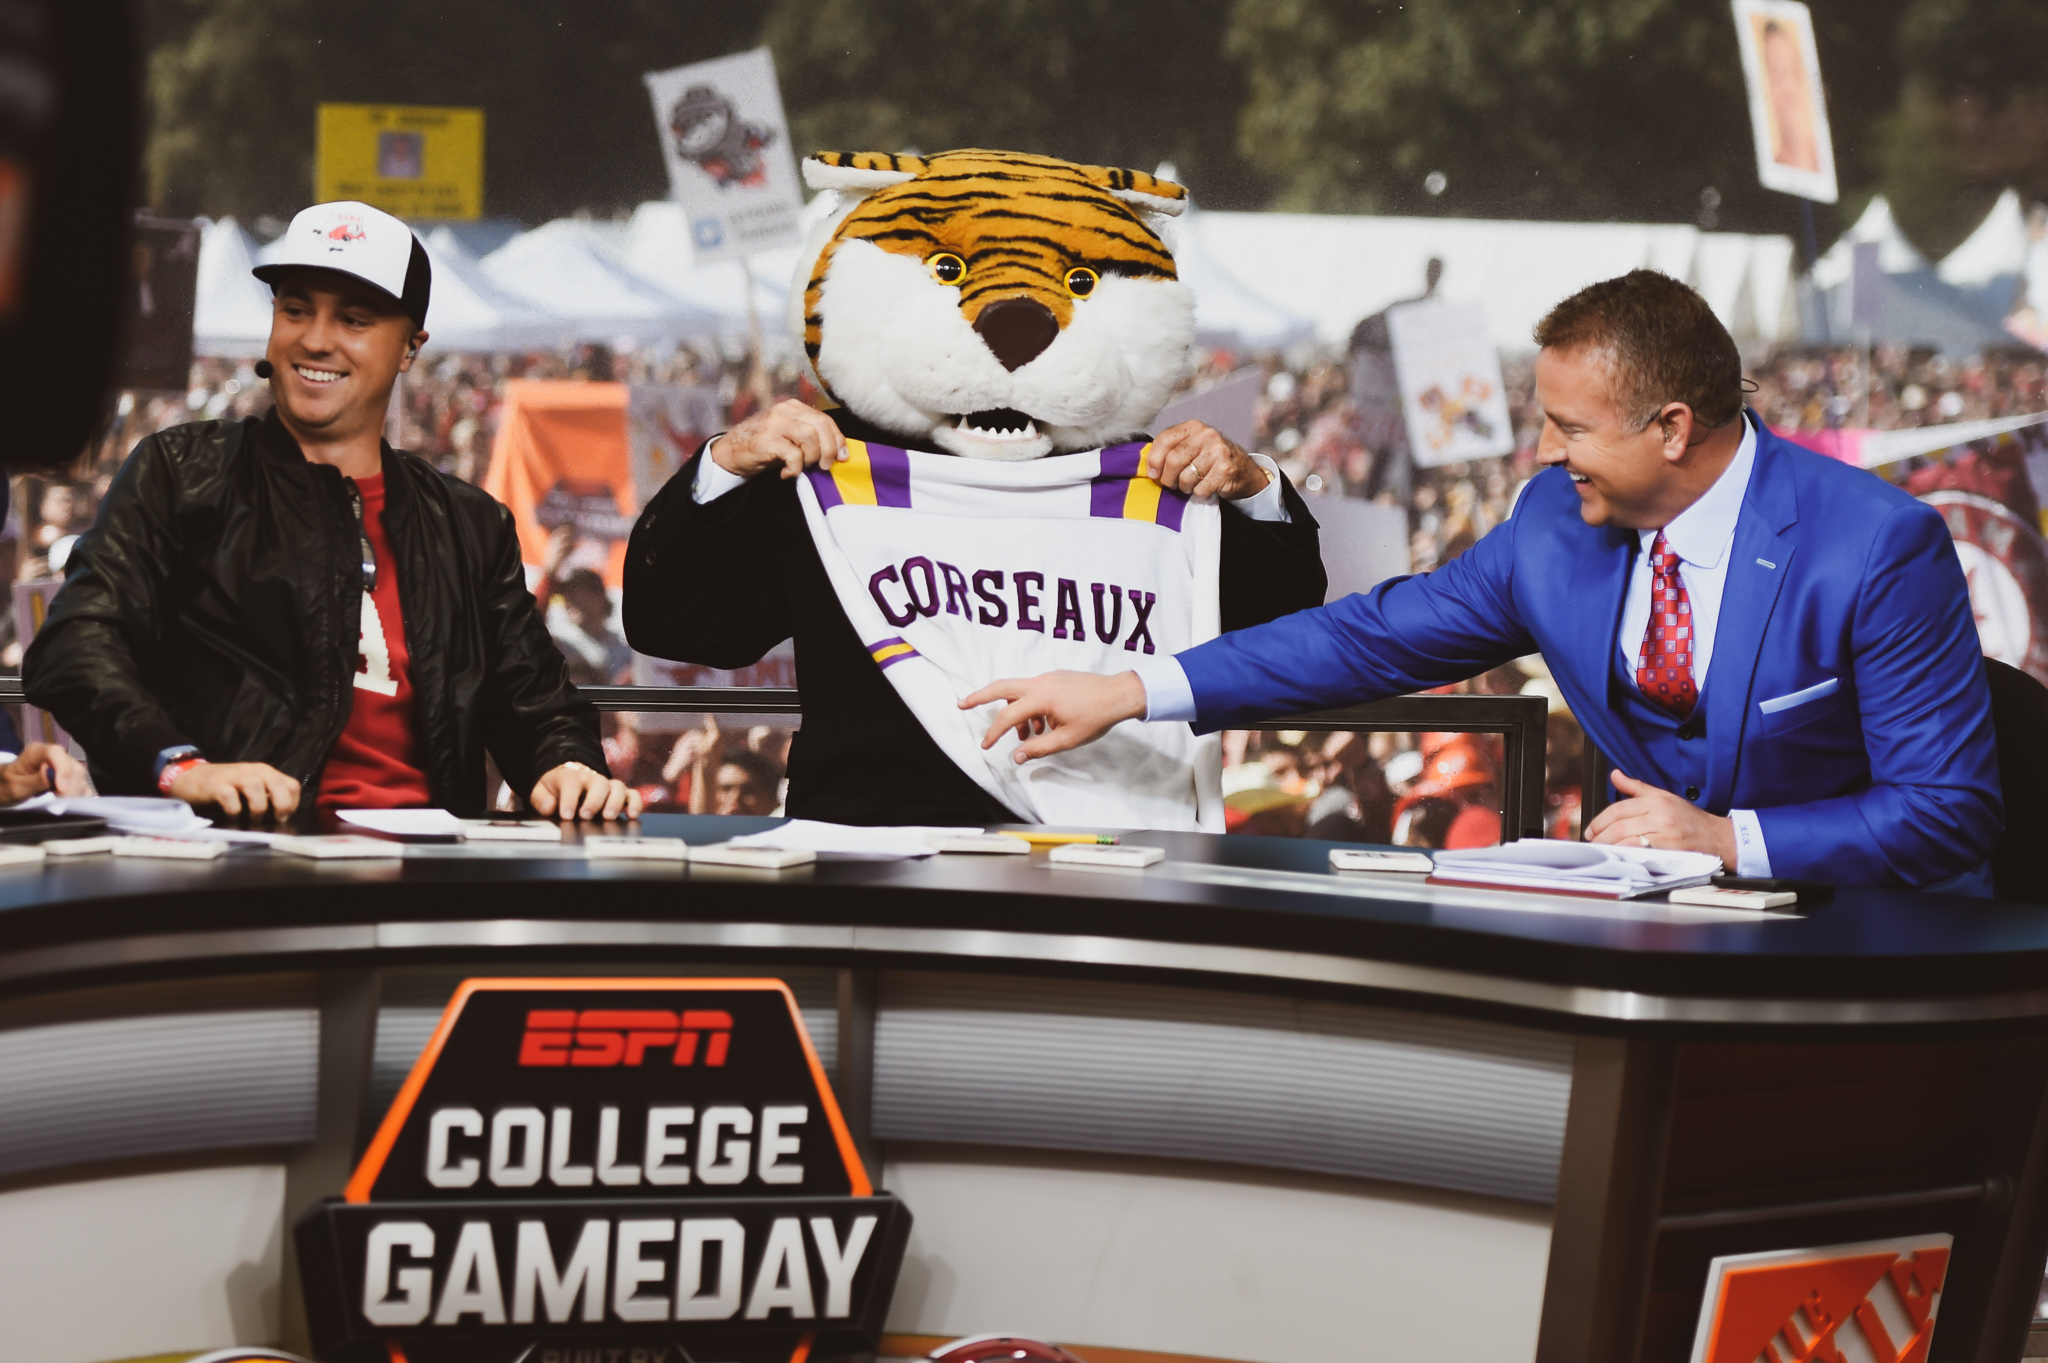 ESPN College Gameday set to broadcast from … The Masters?